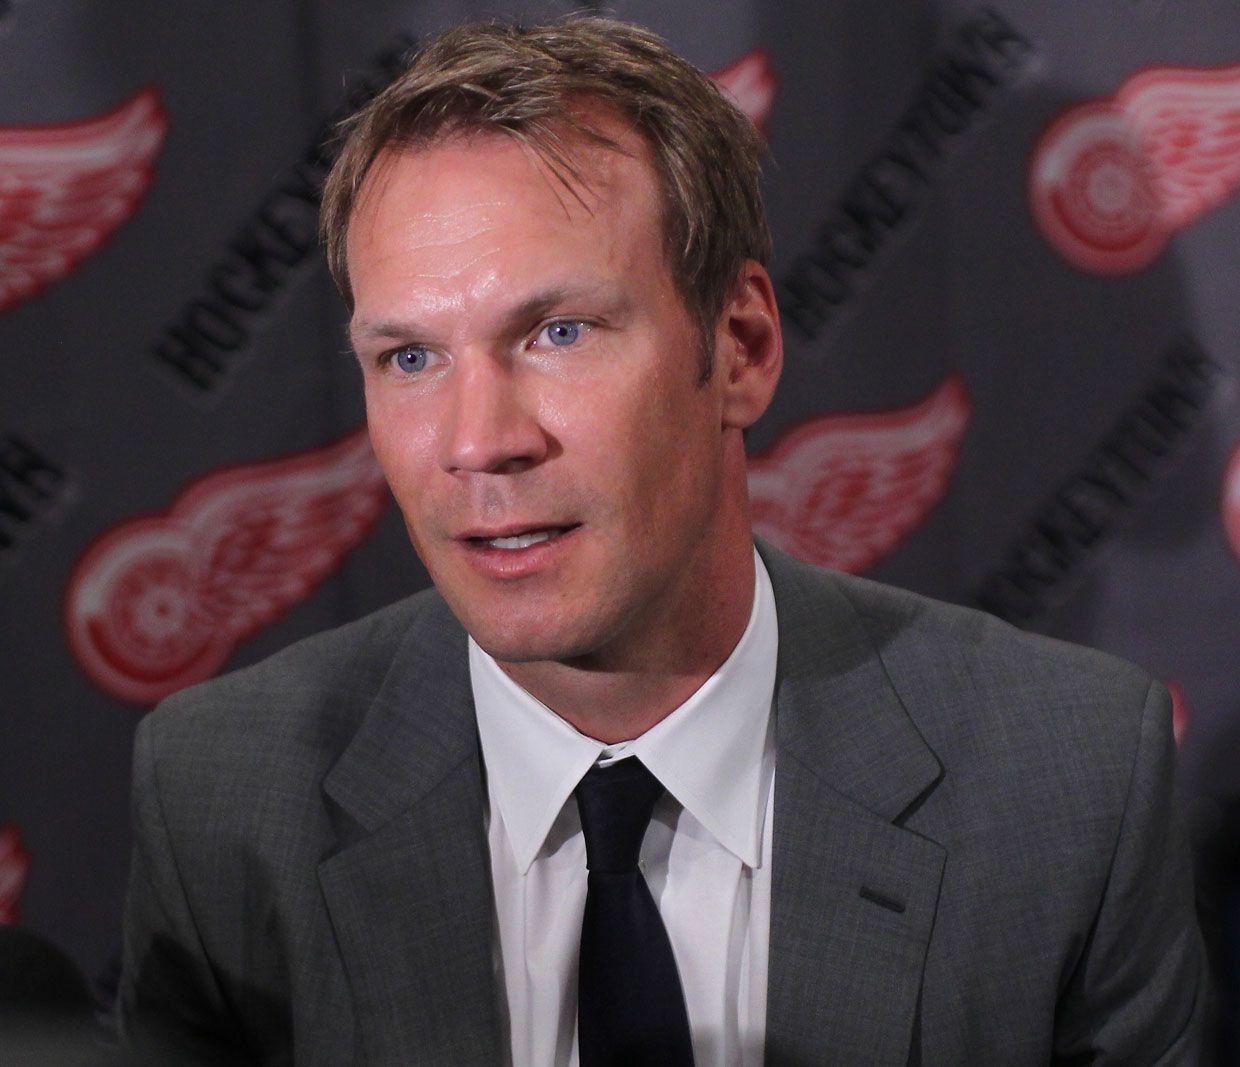 Duff: Wings pay tribute to Lidstrom